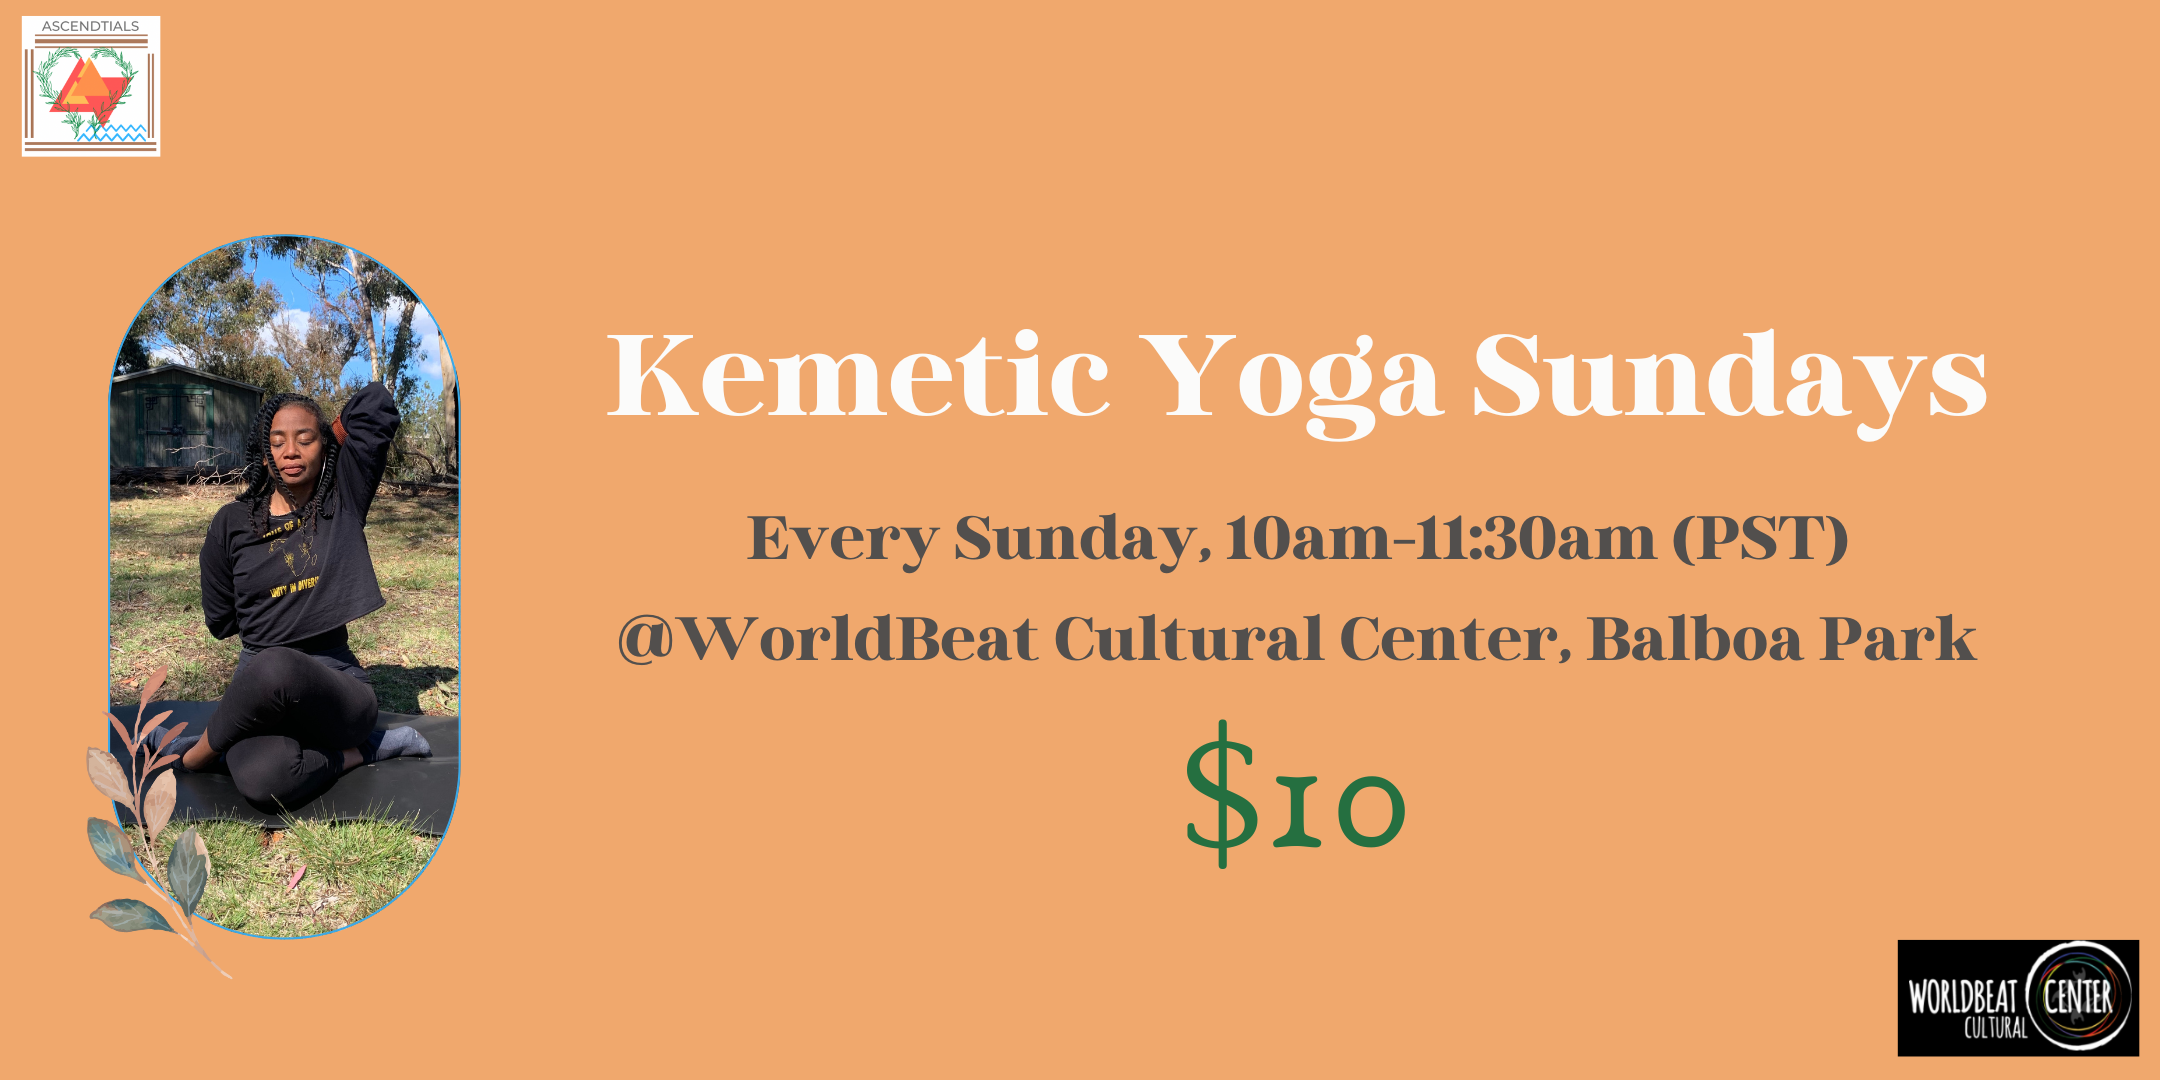 Kemetic Yoga on Sundays at WorldBeat Cultural Center for $10.